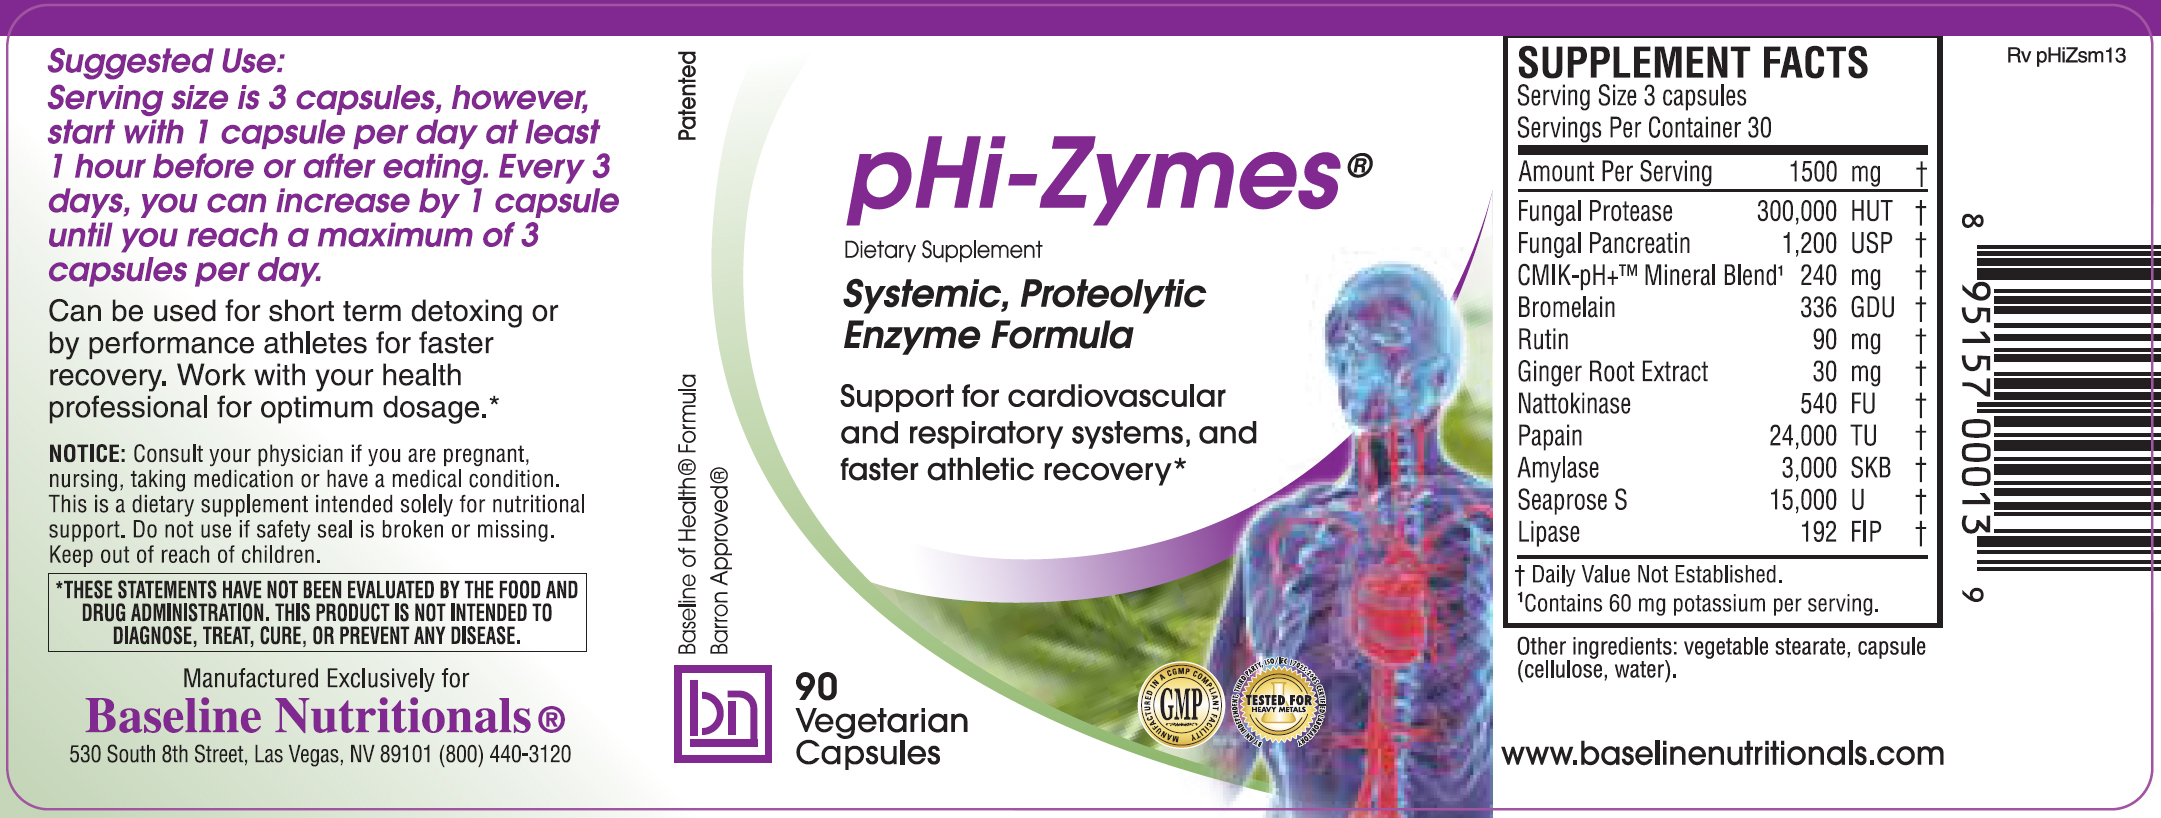 phi-zymes